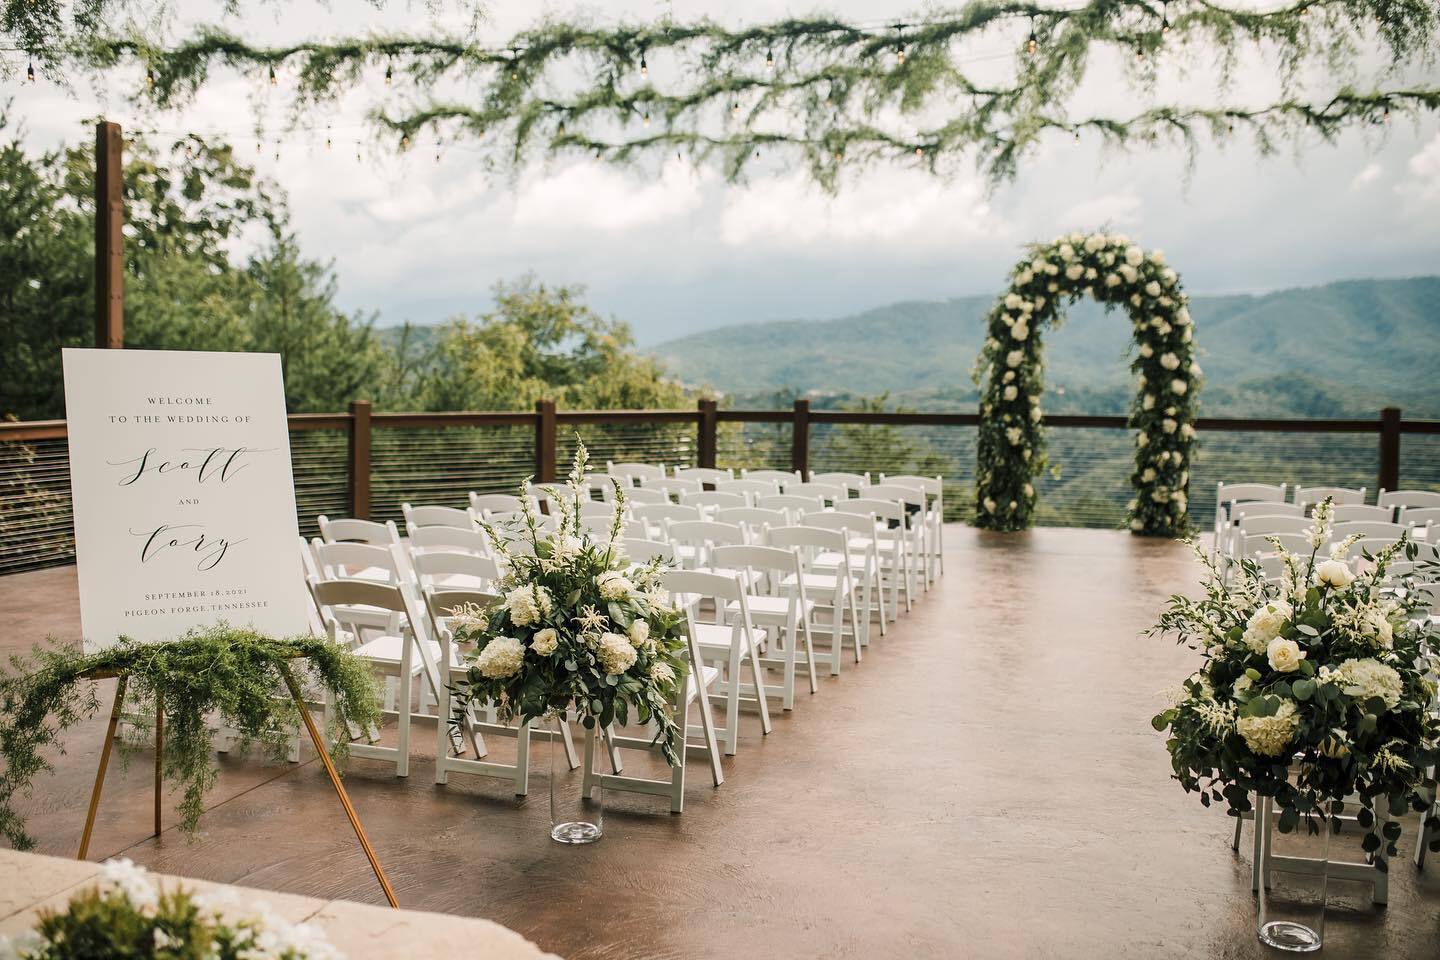 125+ Questions to Ask Wedding Venues Before Signing